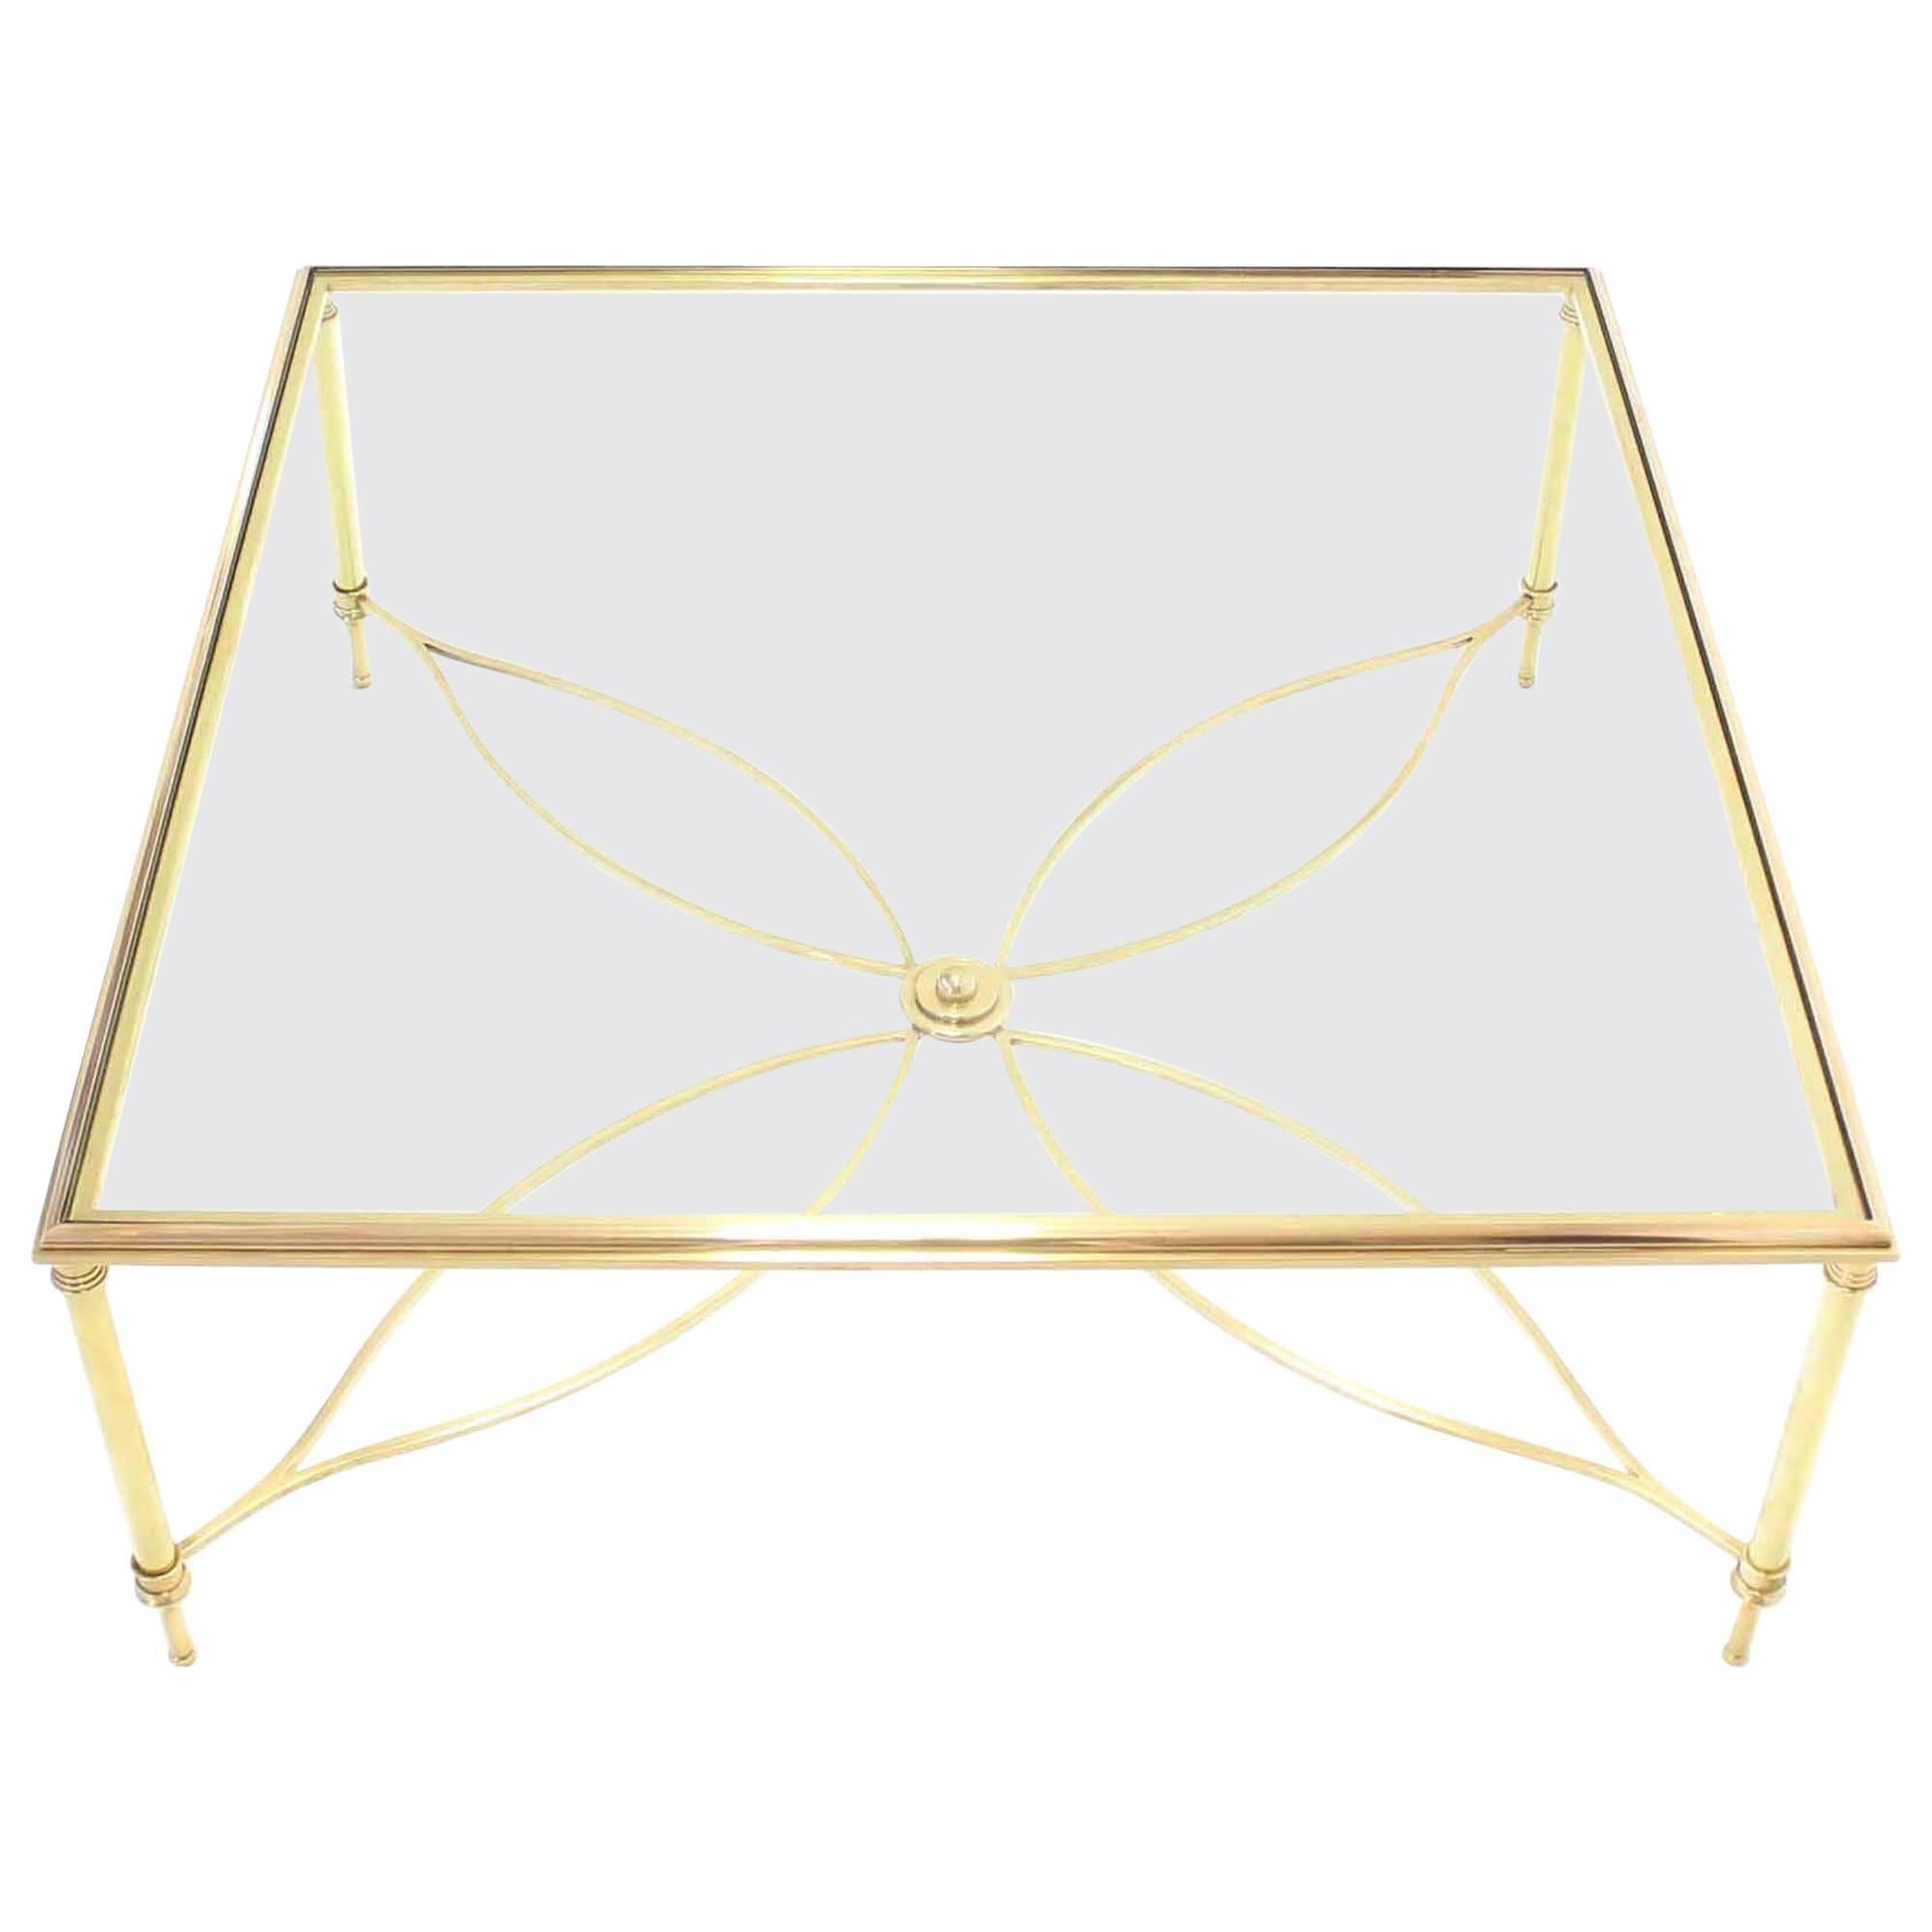 Large Square Brass Coffee Table w/ Lotus Like Base Stretcher